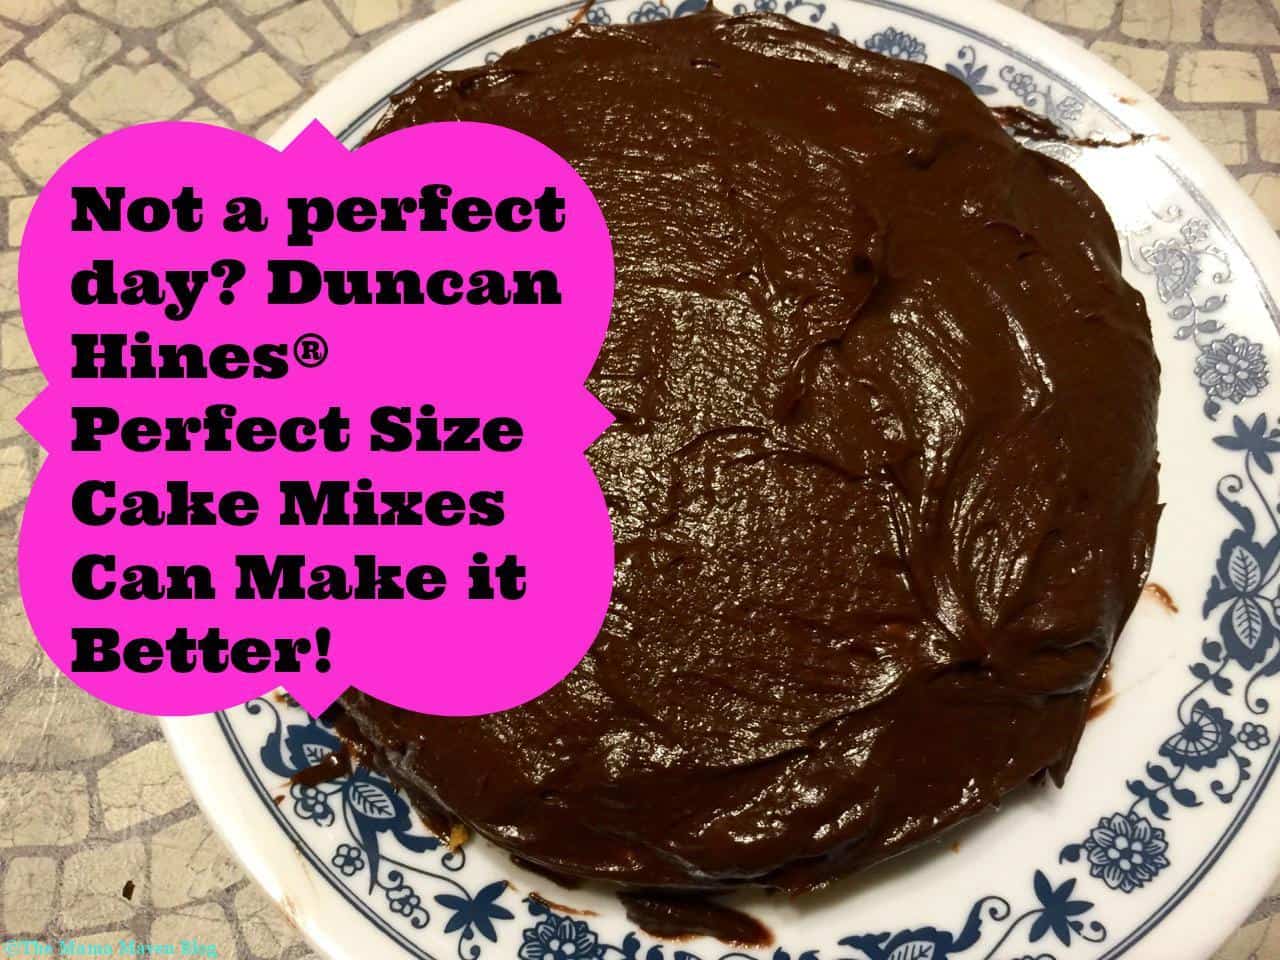 Duncan Hines Perfect Size Cake Mix Makes Any Day Better